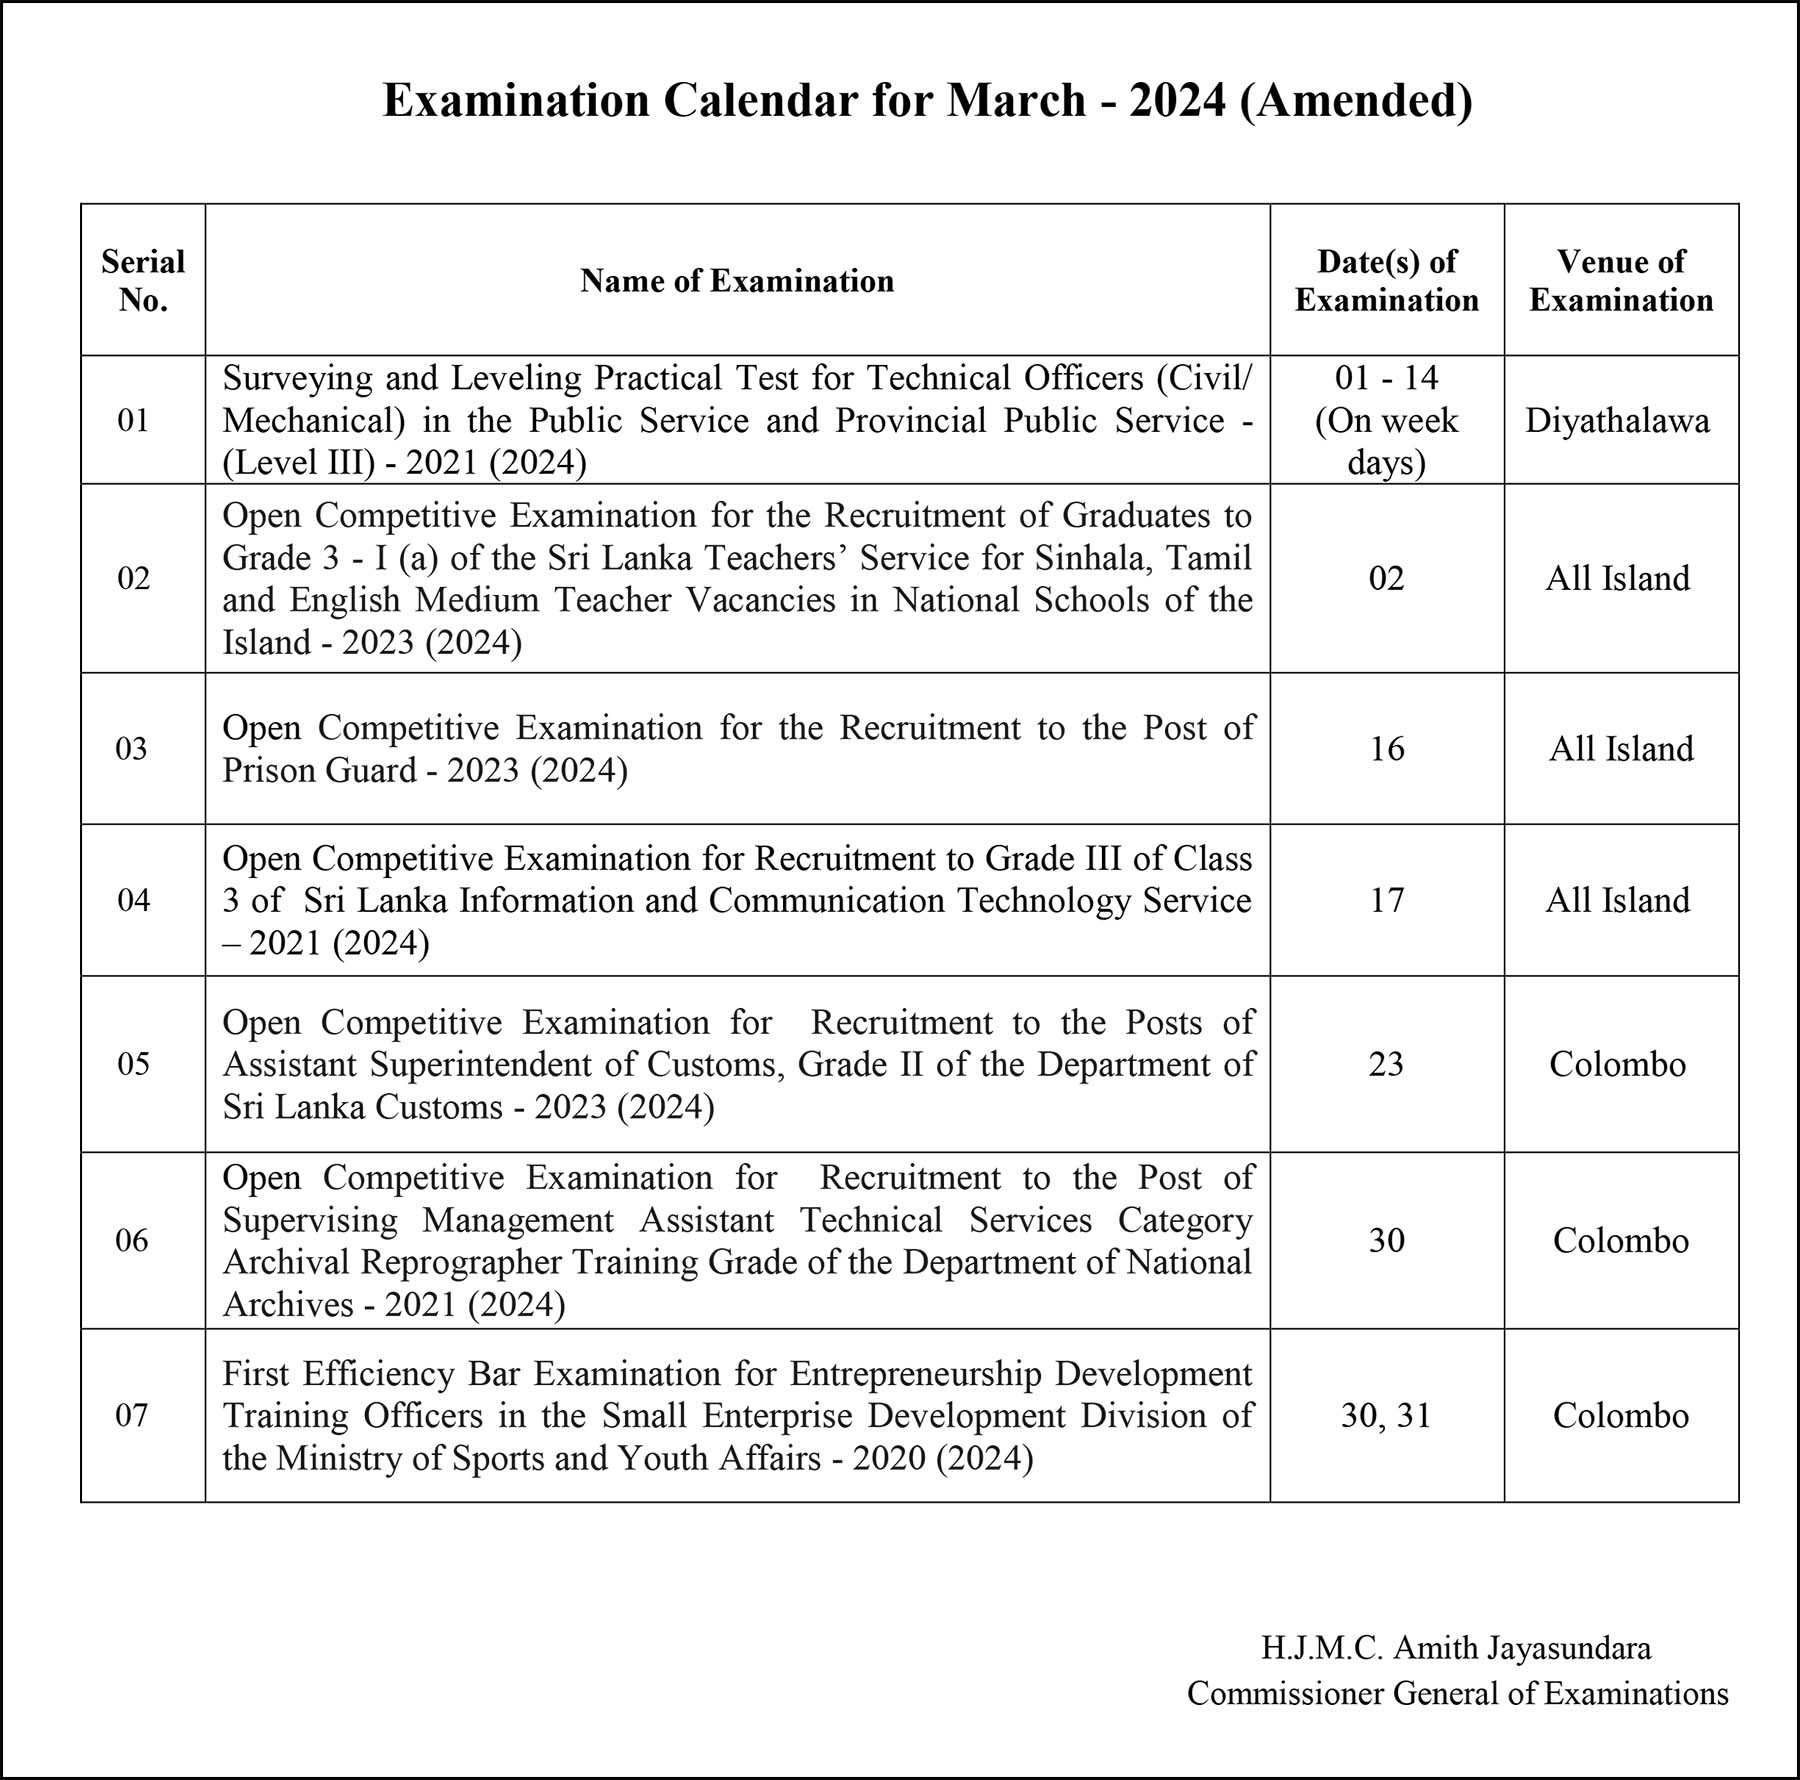 Examination Calendar for March 2024 (Amended) - Department of Examinations